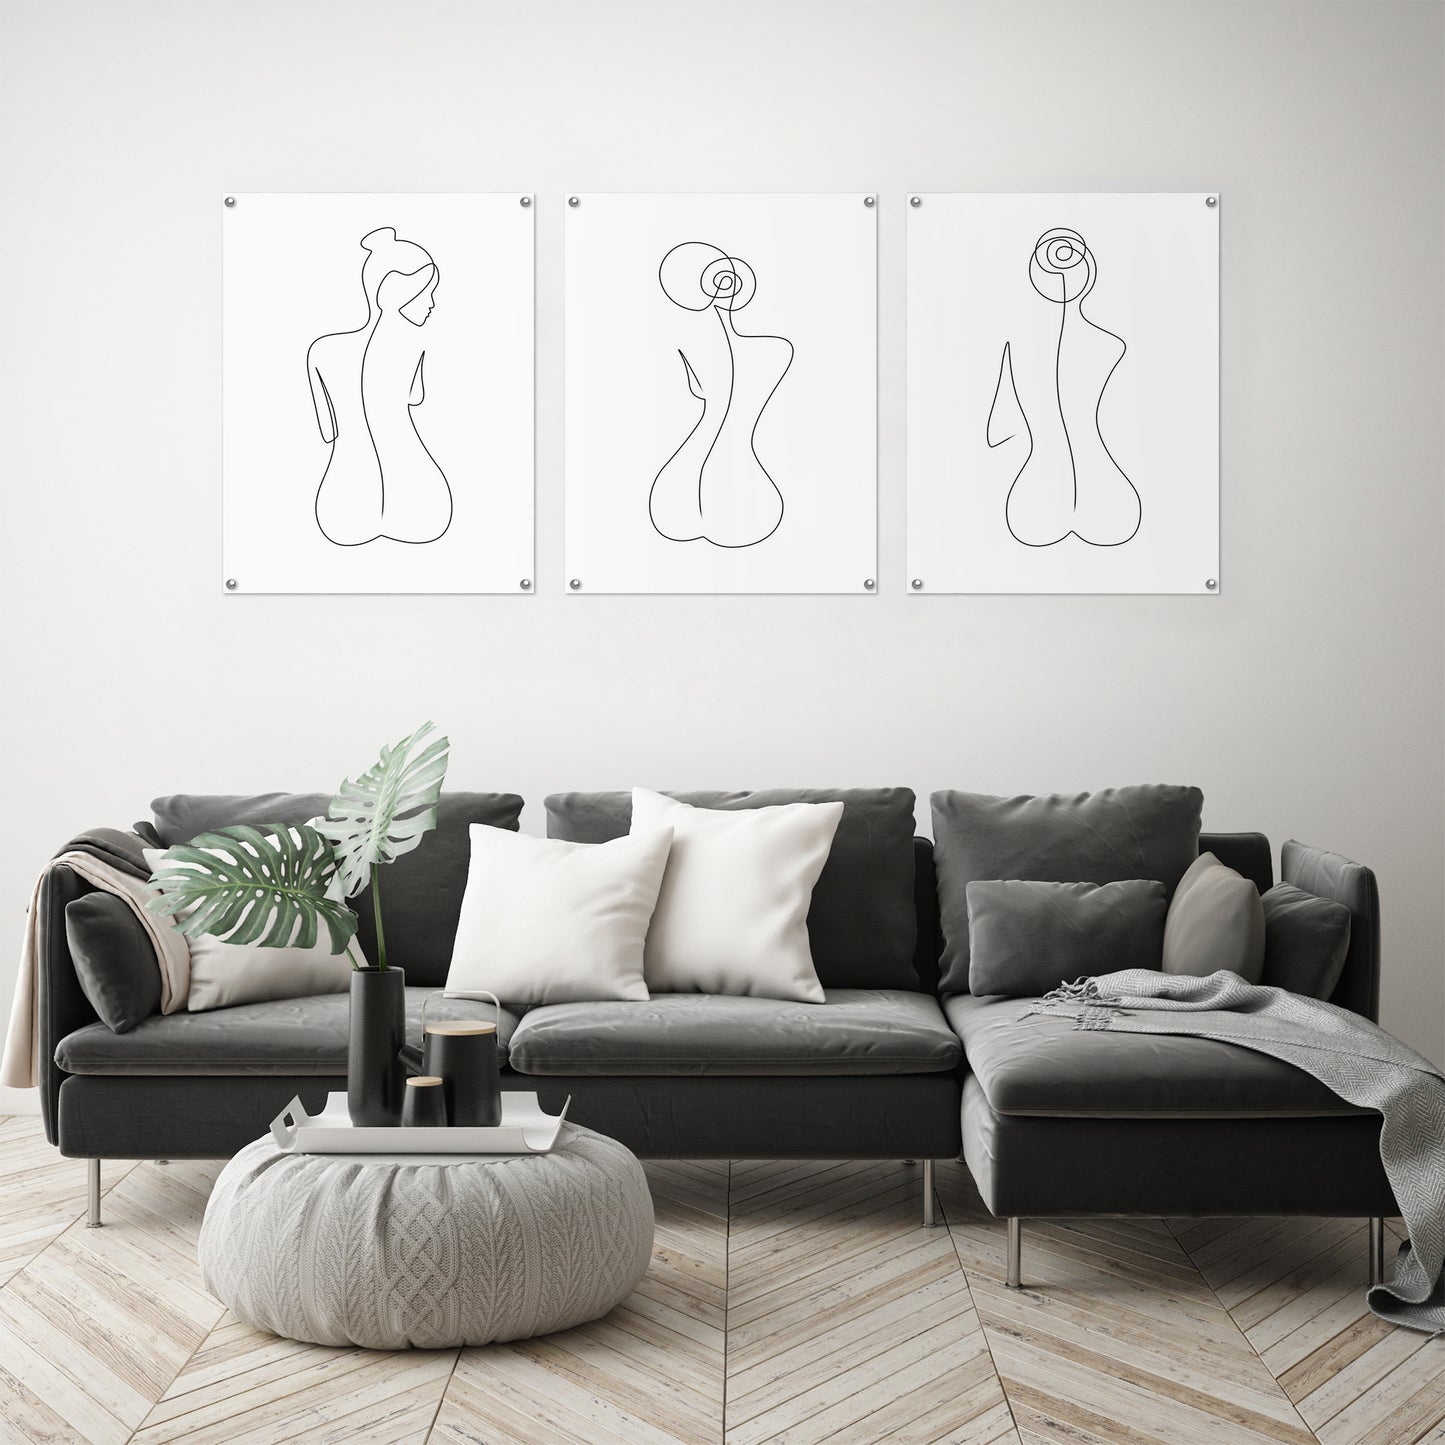 (Set of 3) Triptych Wall Art Abstract Female Shapes by Explicit Design - Poster Print